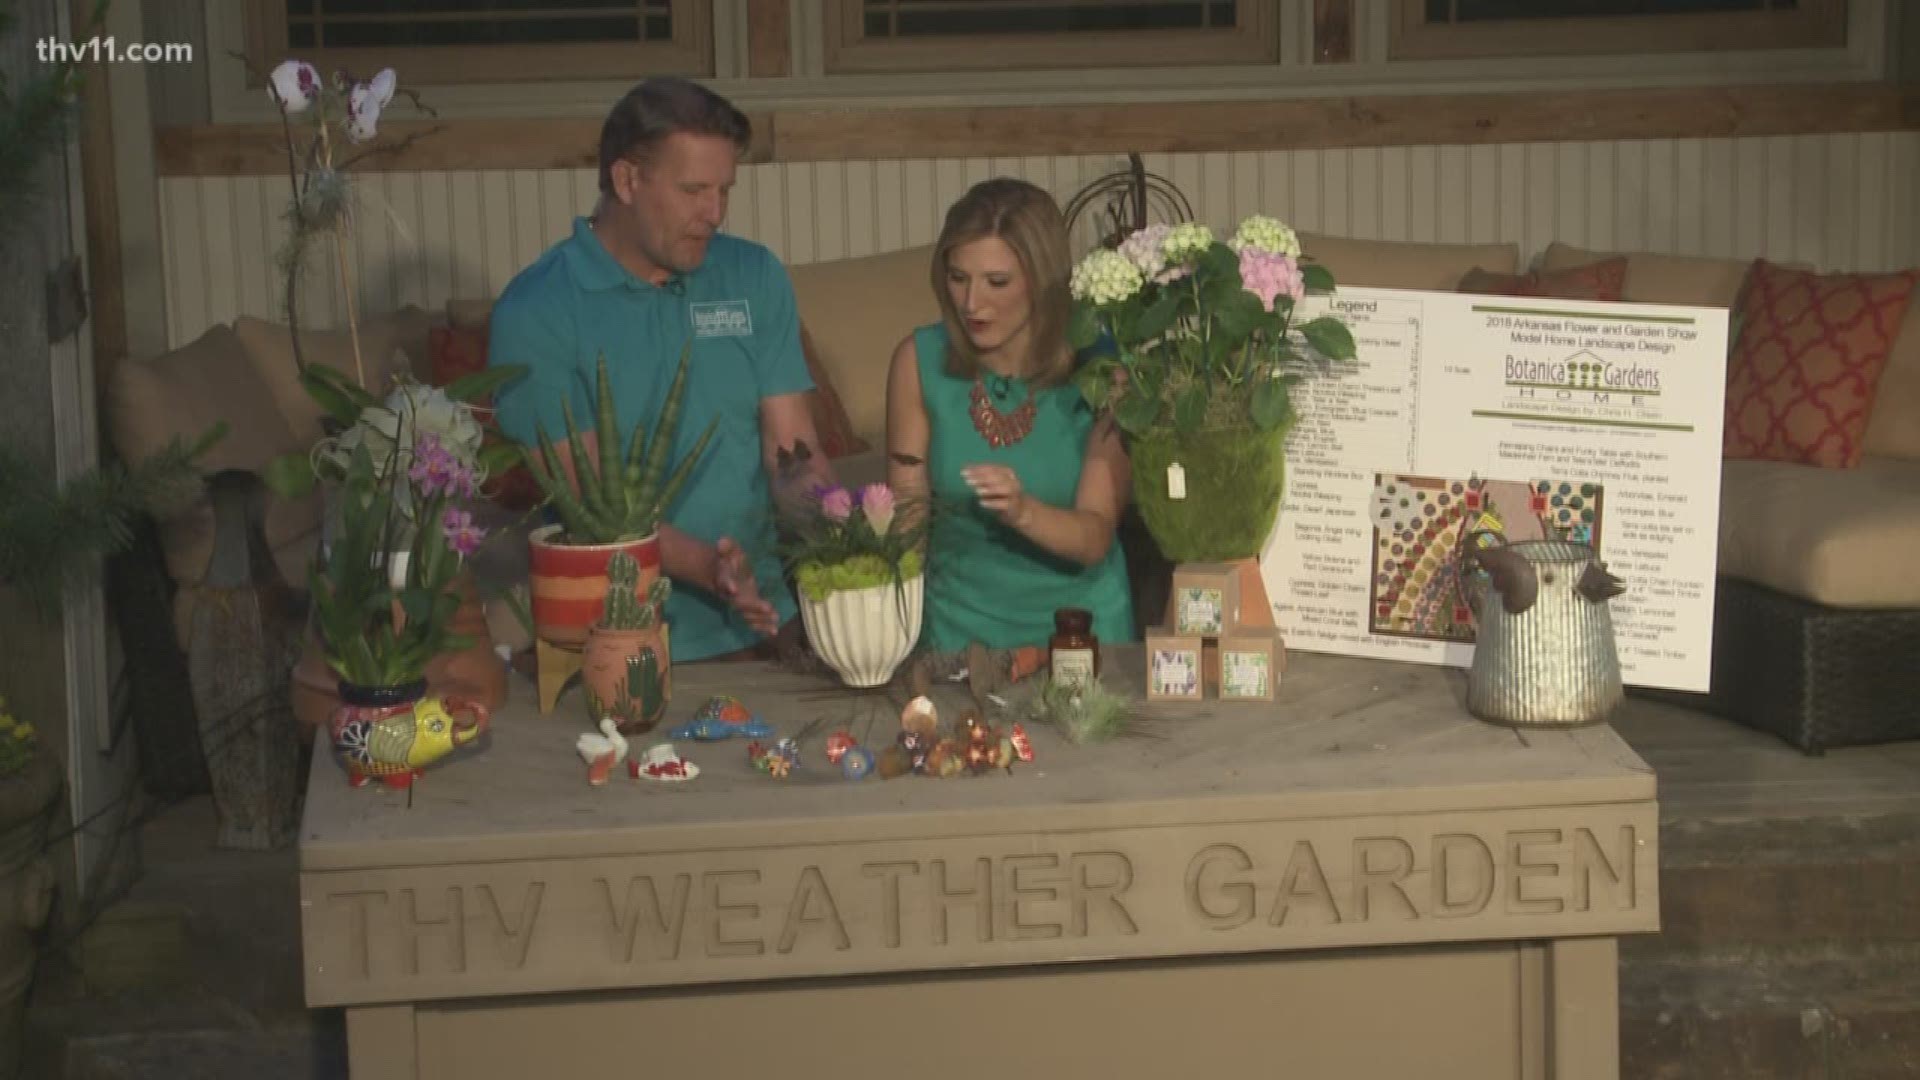 Chris H. Olsen shows us how to make horticultural gifts for moms without getting our hands dirty.